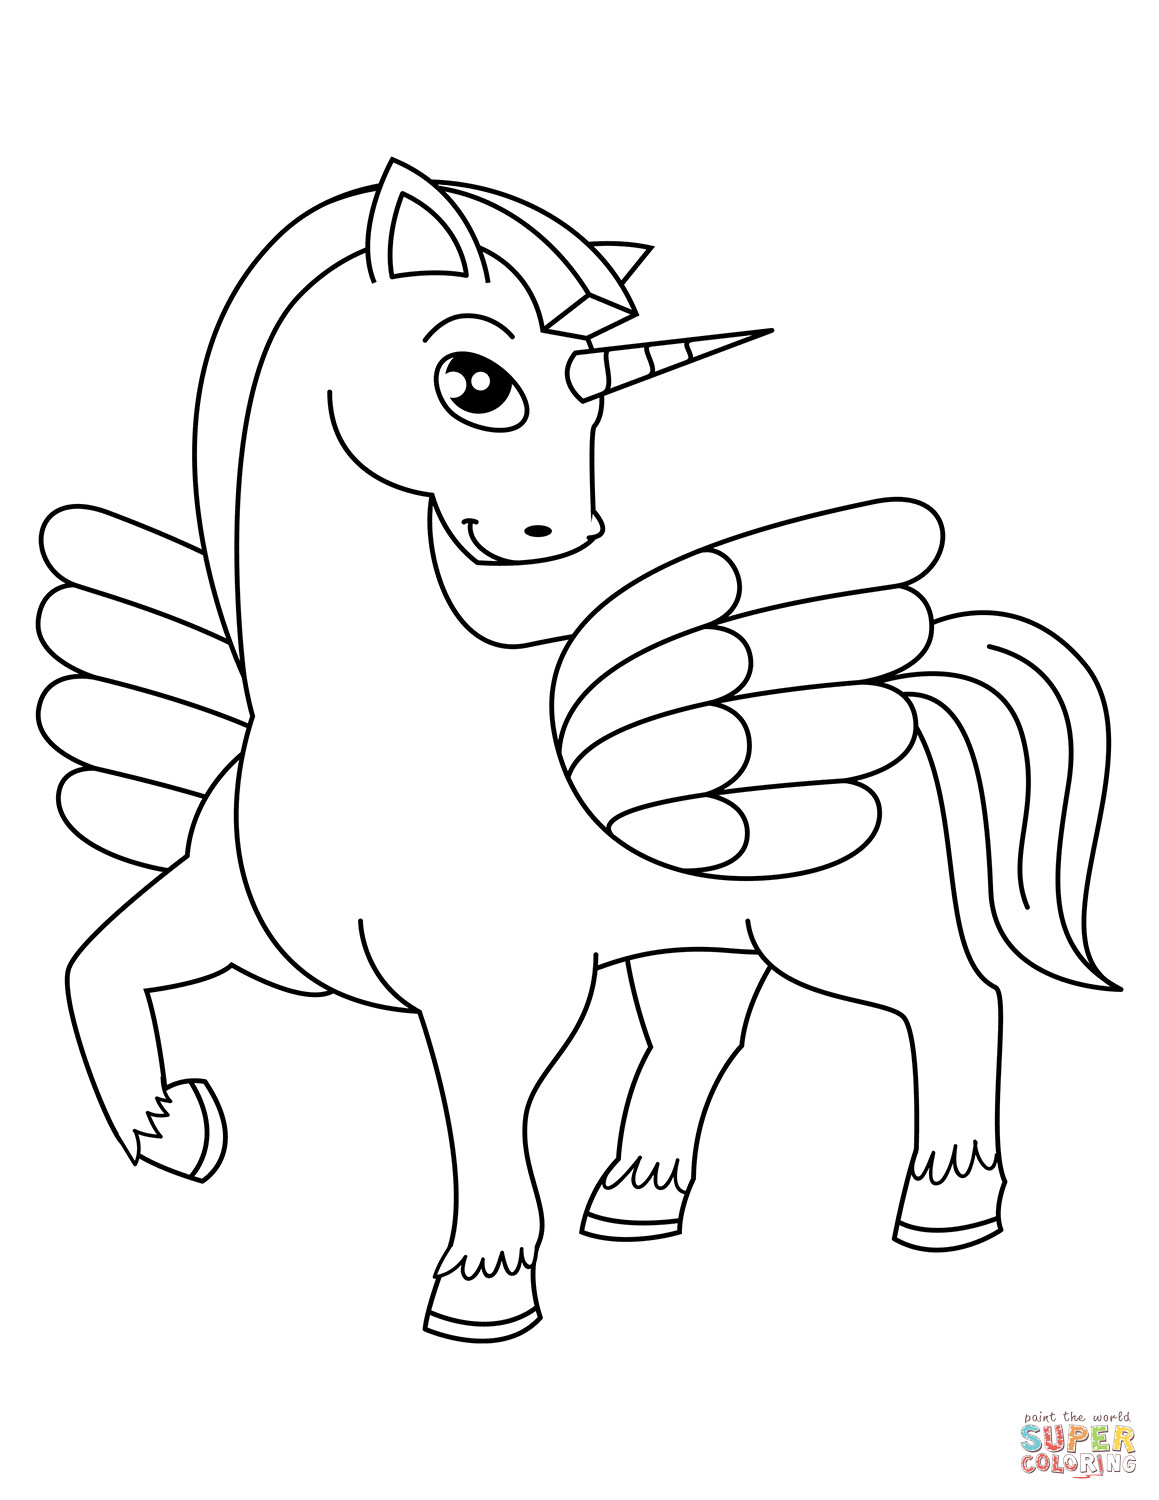 Unicorn Coloring Sheets For Kids
 Cute Winged Unicorn coloring page